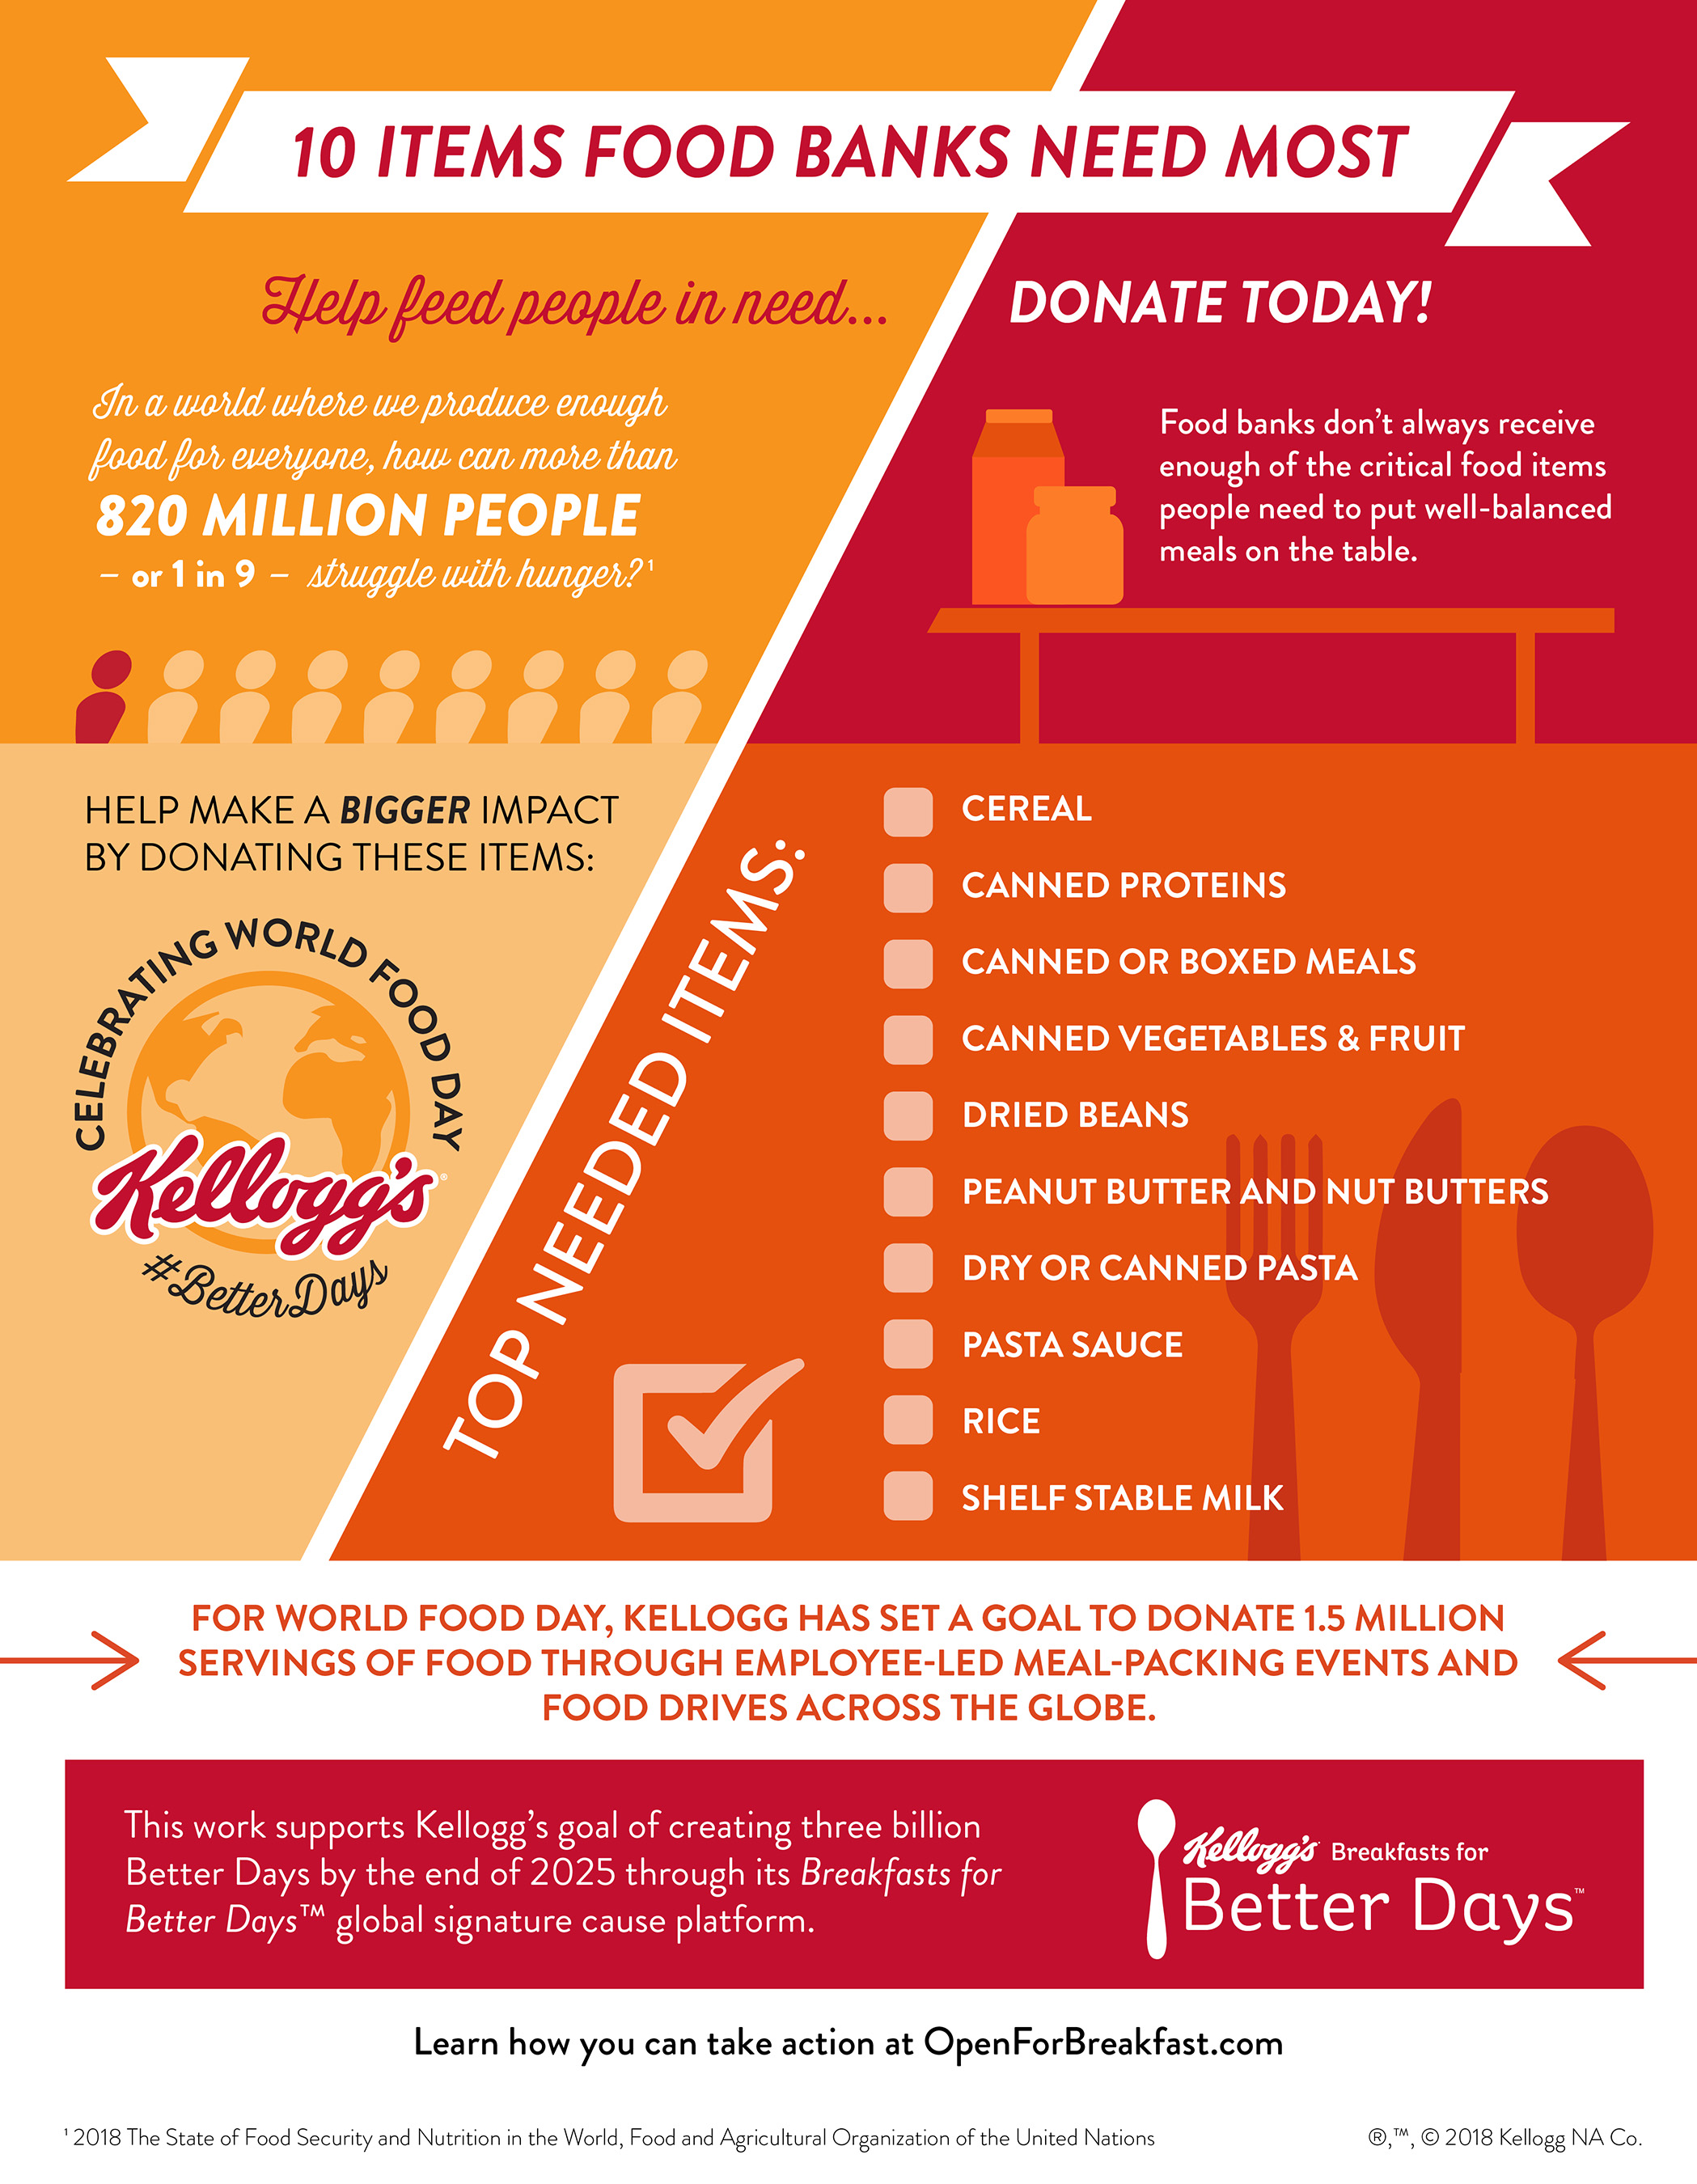 Learn how you can fight hunger